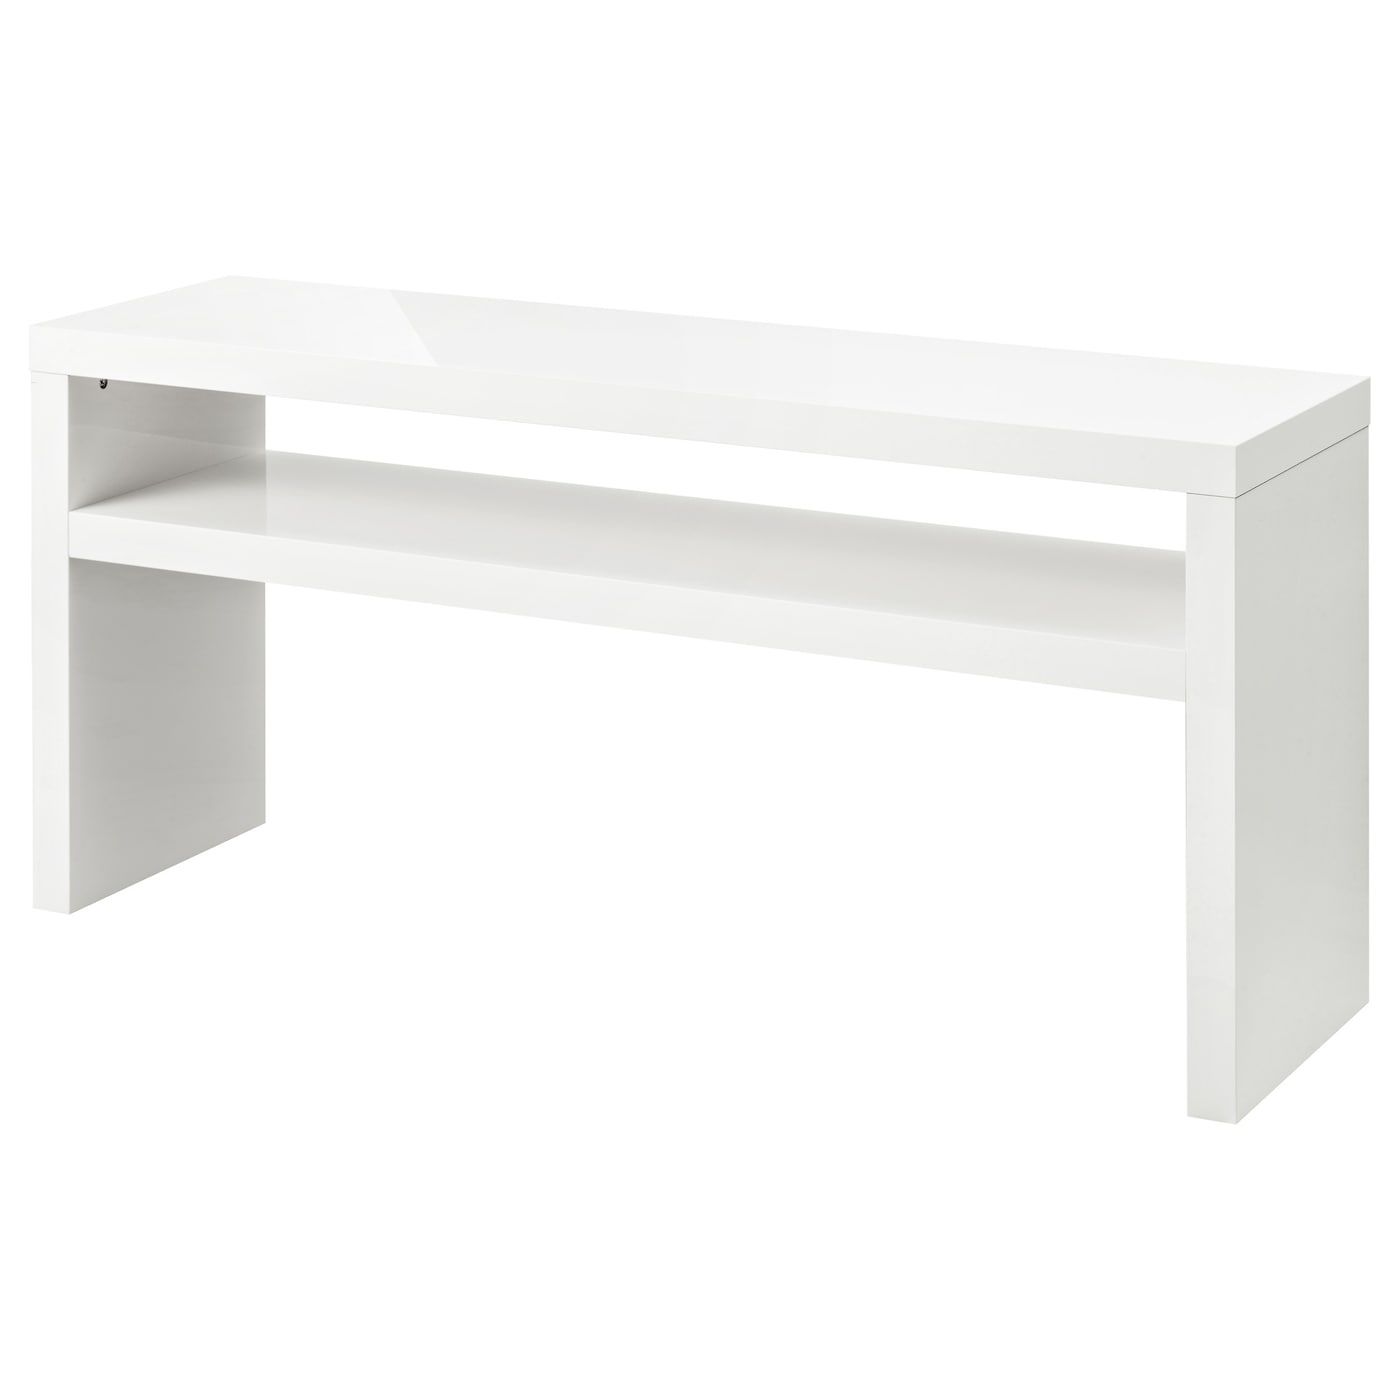 Lack Console Table, White, High Gloss – Ikea For Gloss White Steel Console Tables (View 6 of 20)